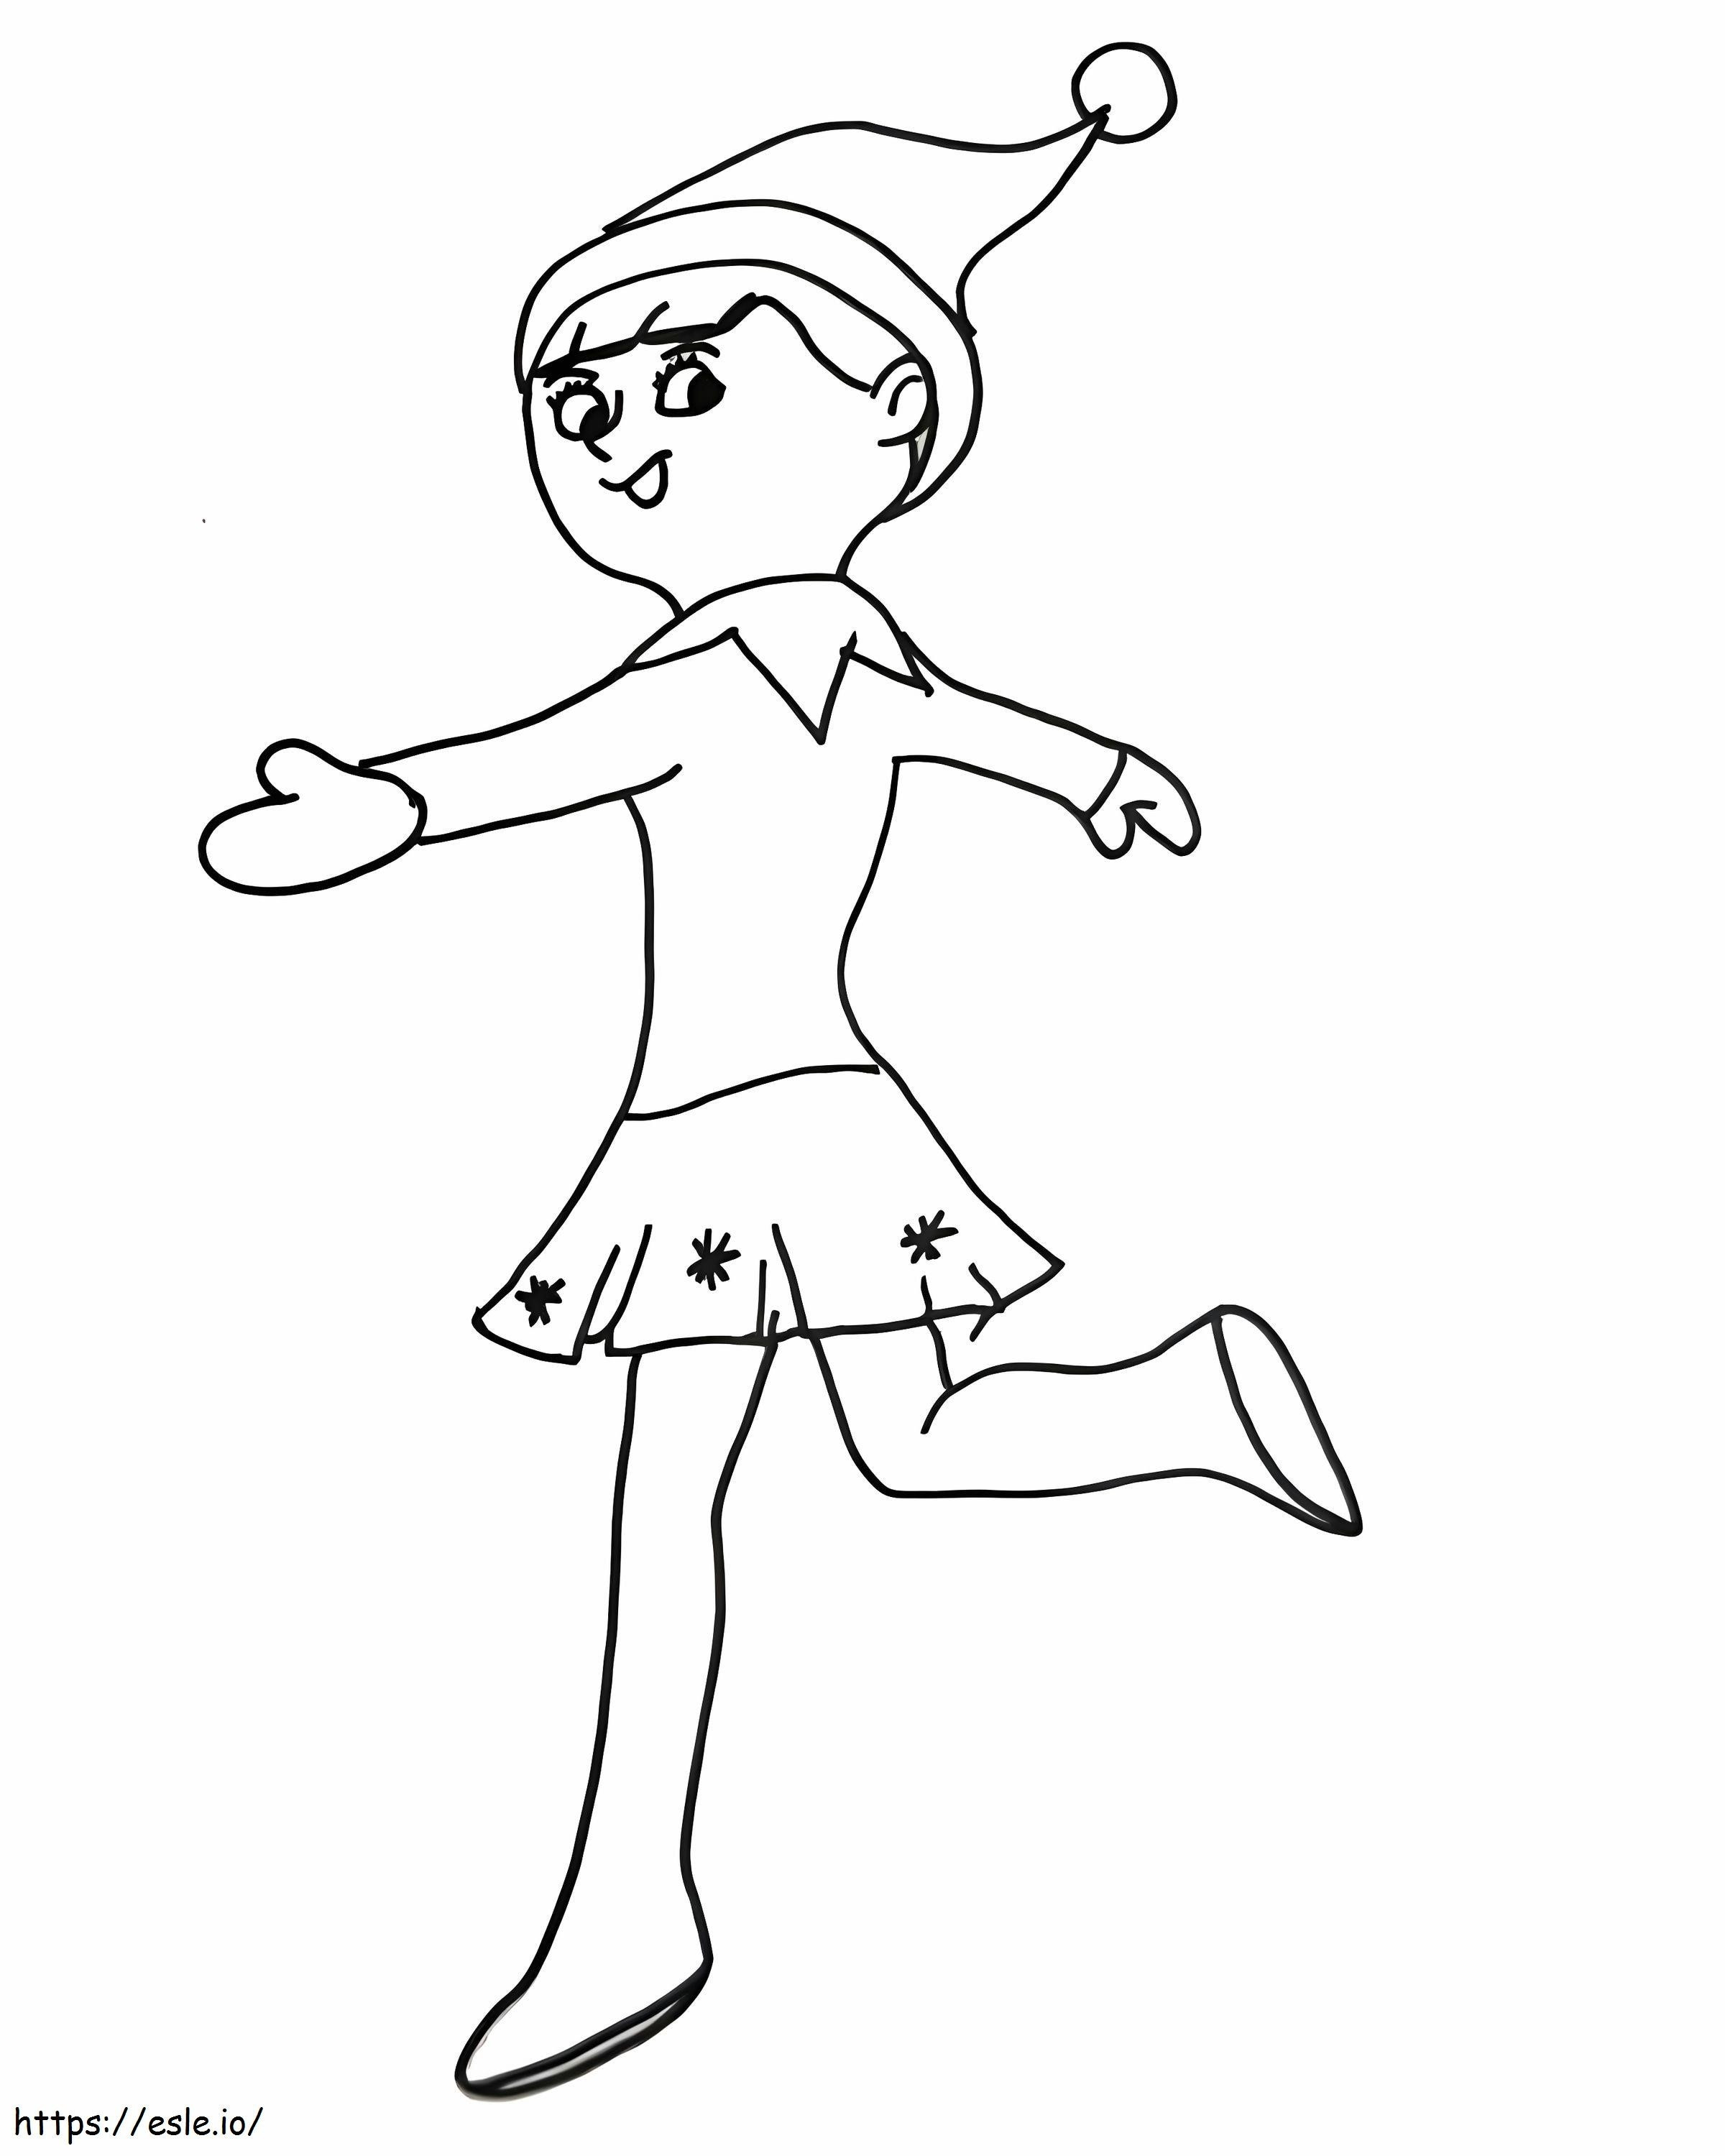 Staggering Elf On The Shelf coloring page